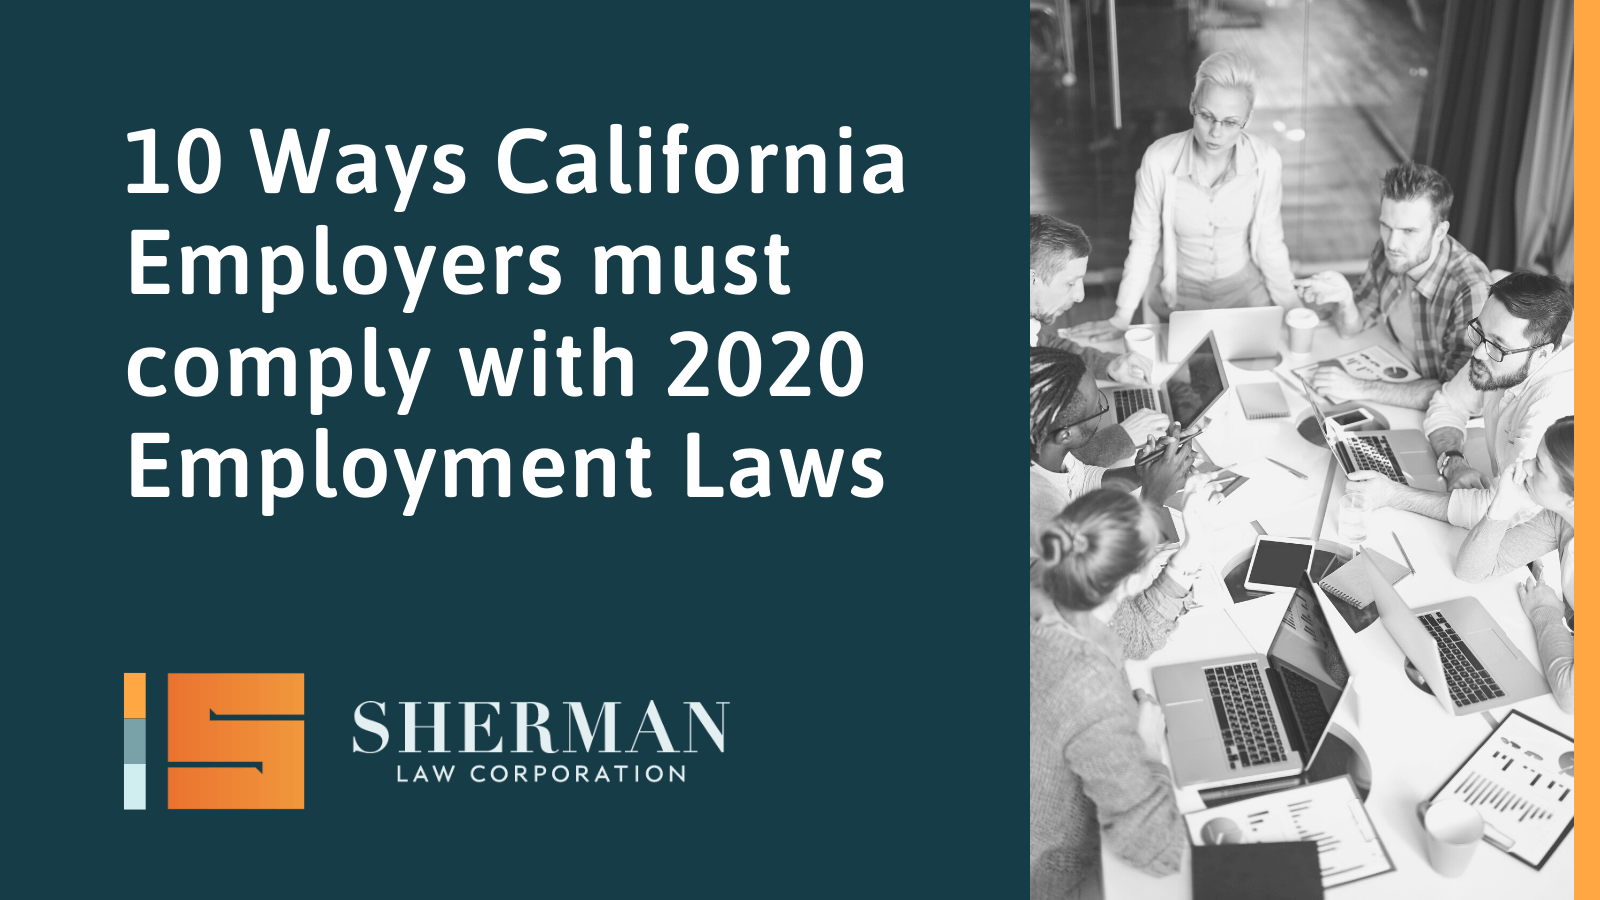 10 Ways California Employers must comply with 2020 Employment Laws - sherman law corporation - california employment lawyer